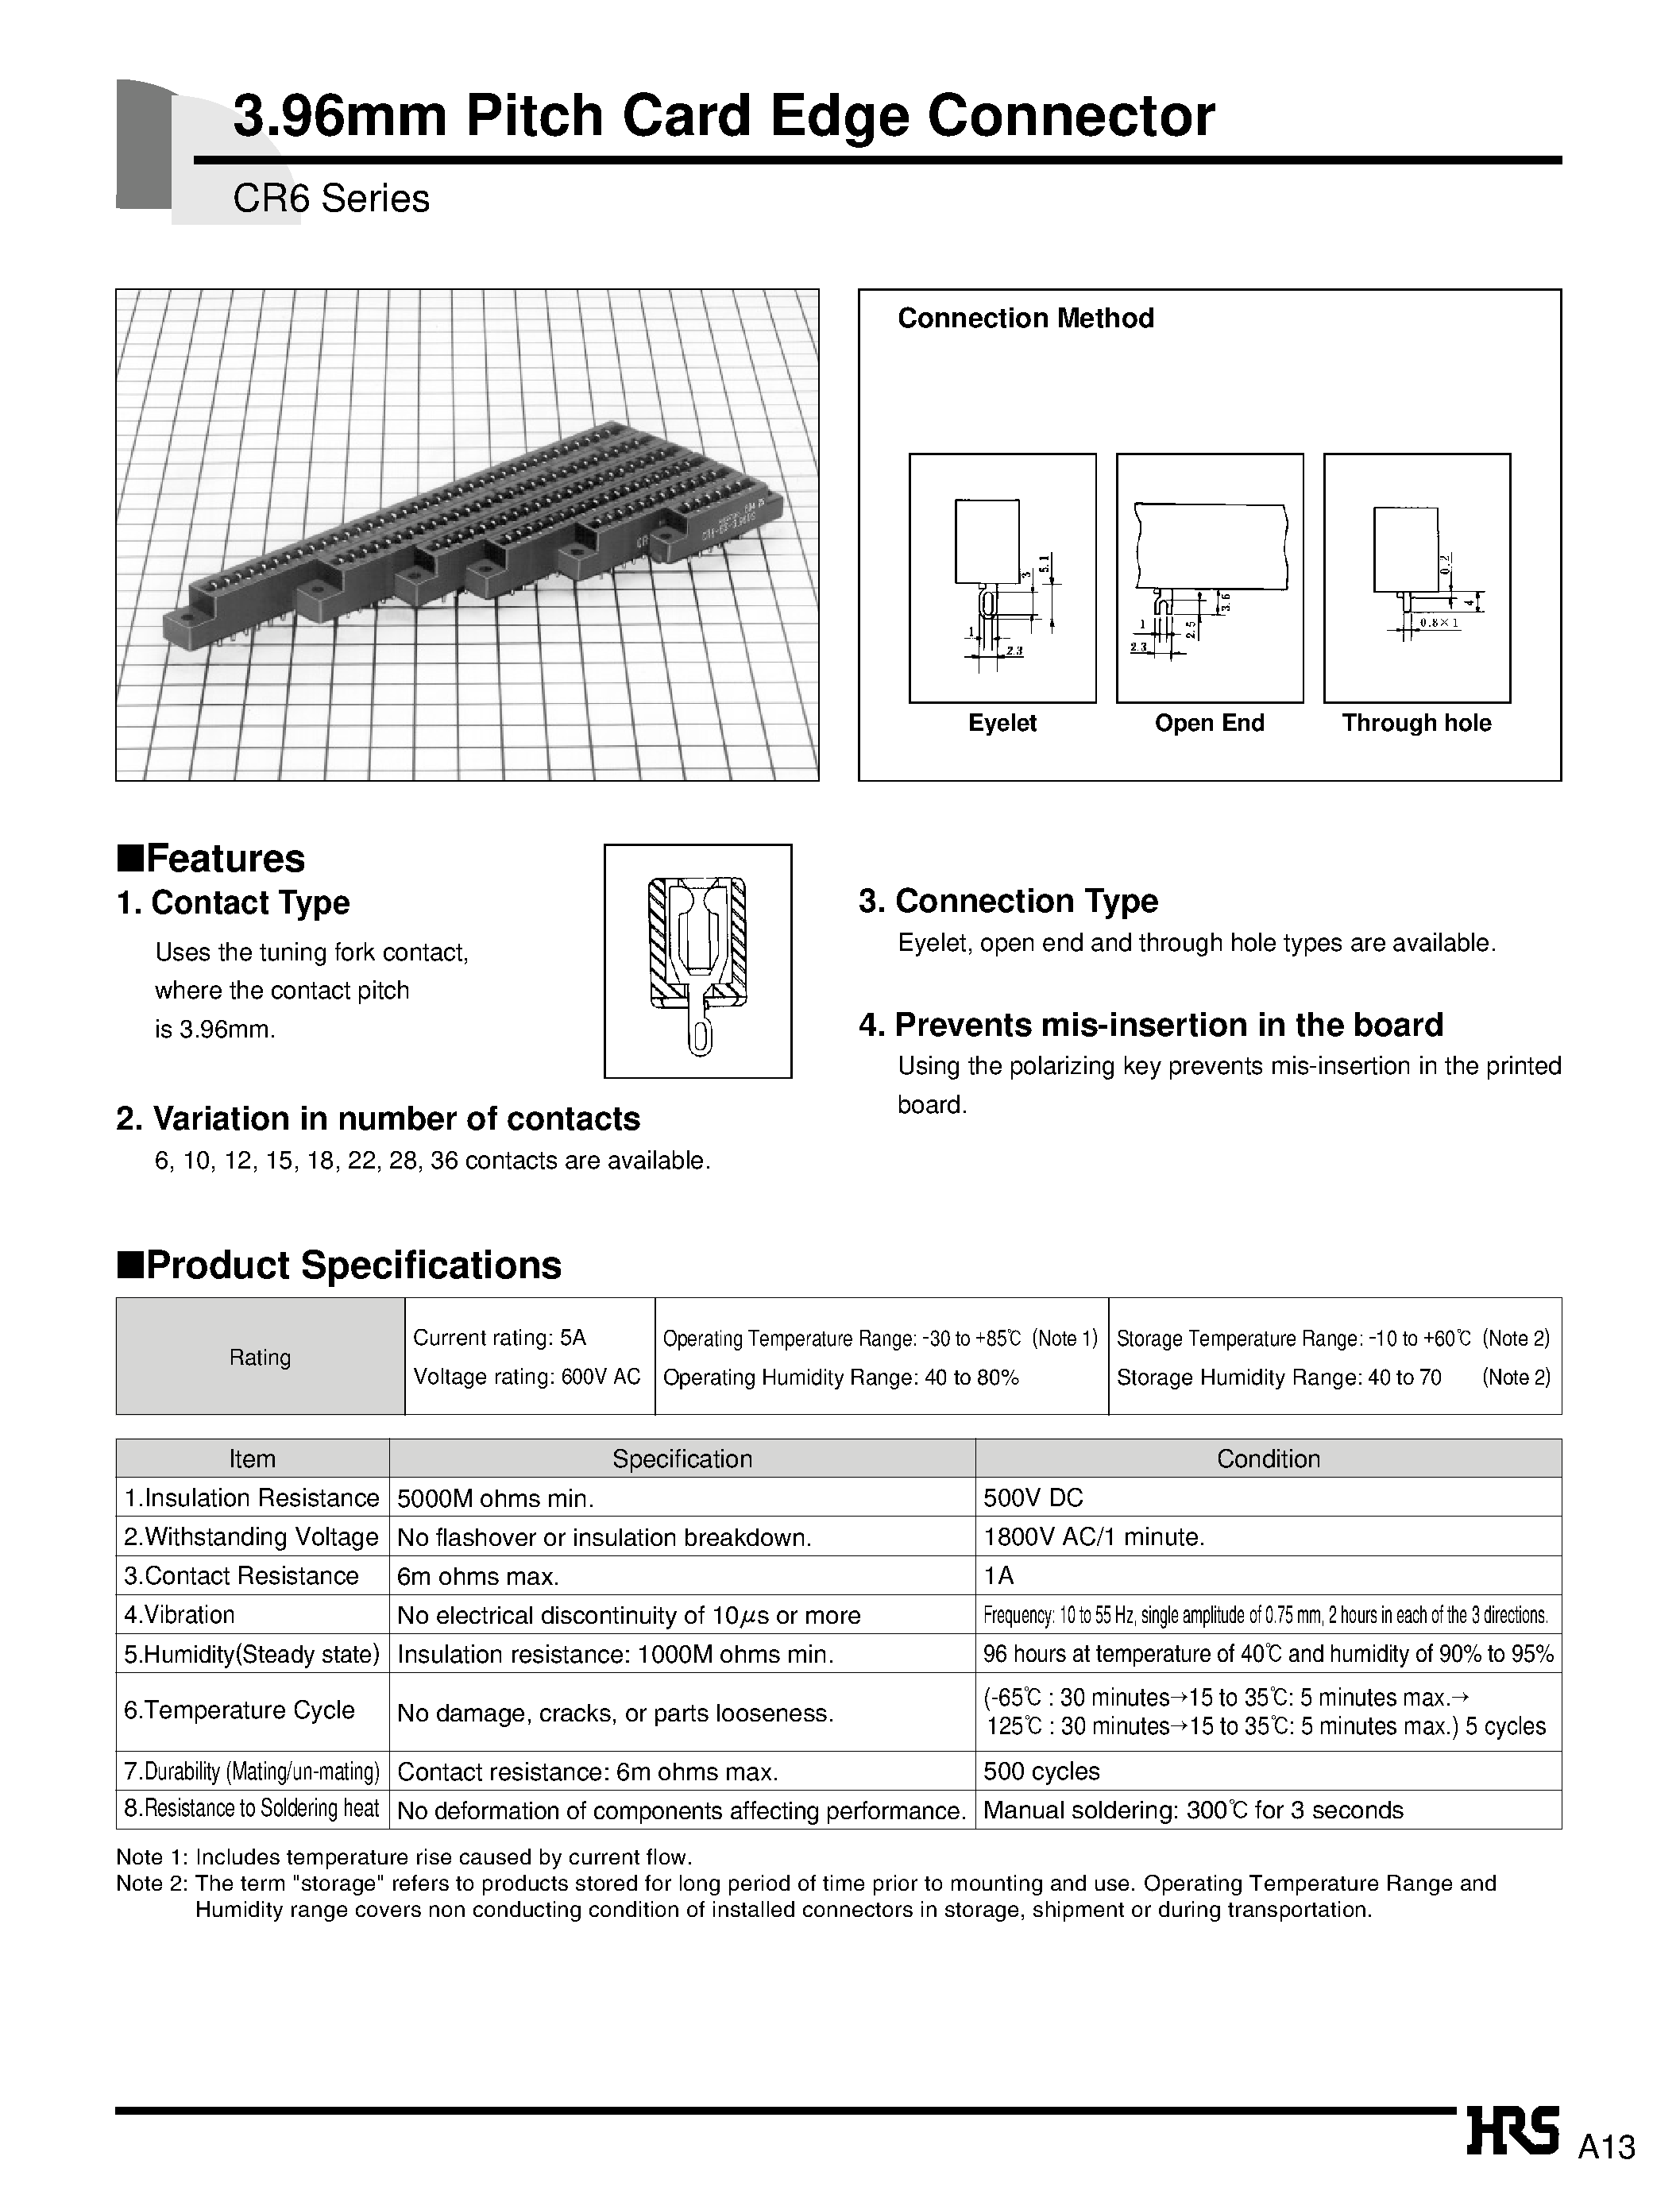 Datasheet CR6-10S-3.96DS - 3.96mm Pitch Card Edge Connector page 1